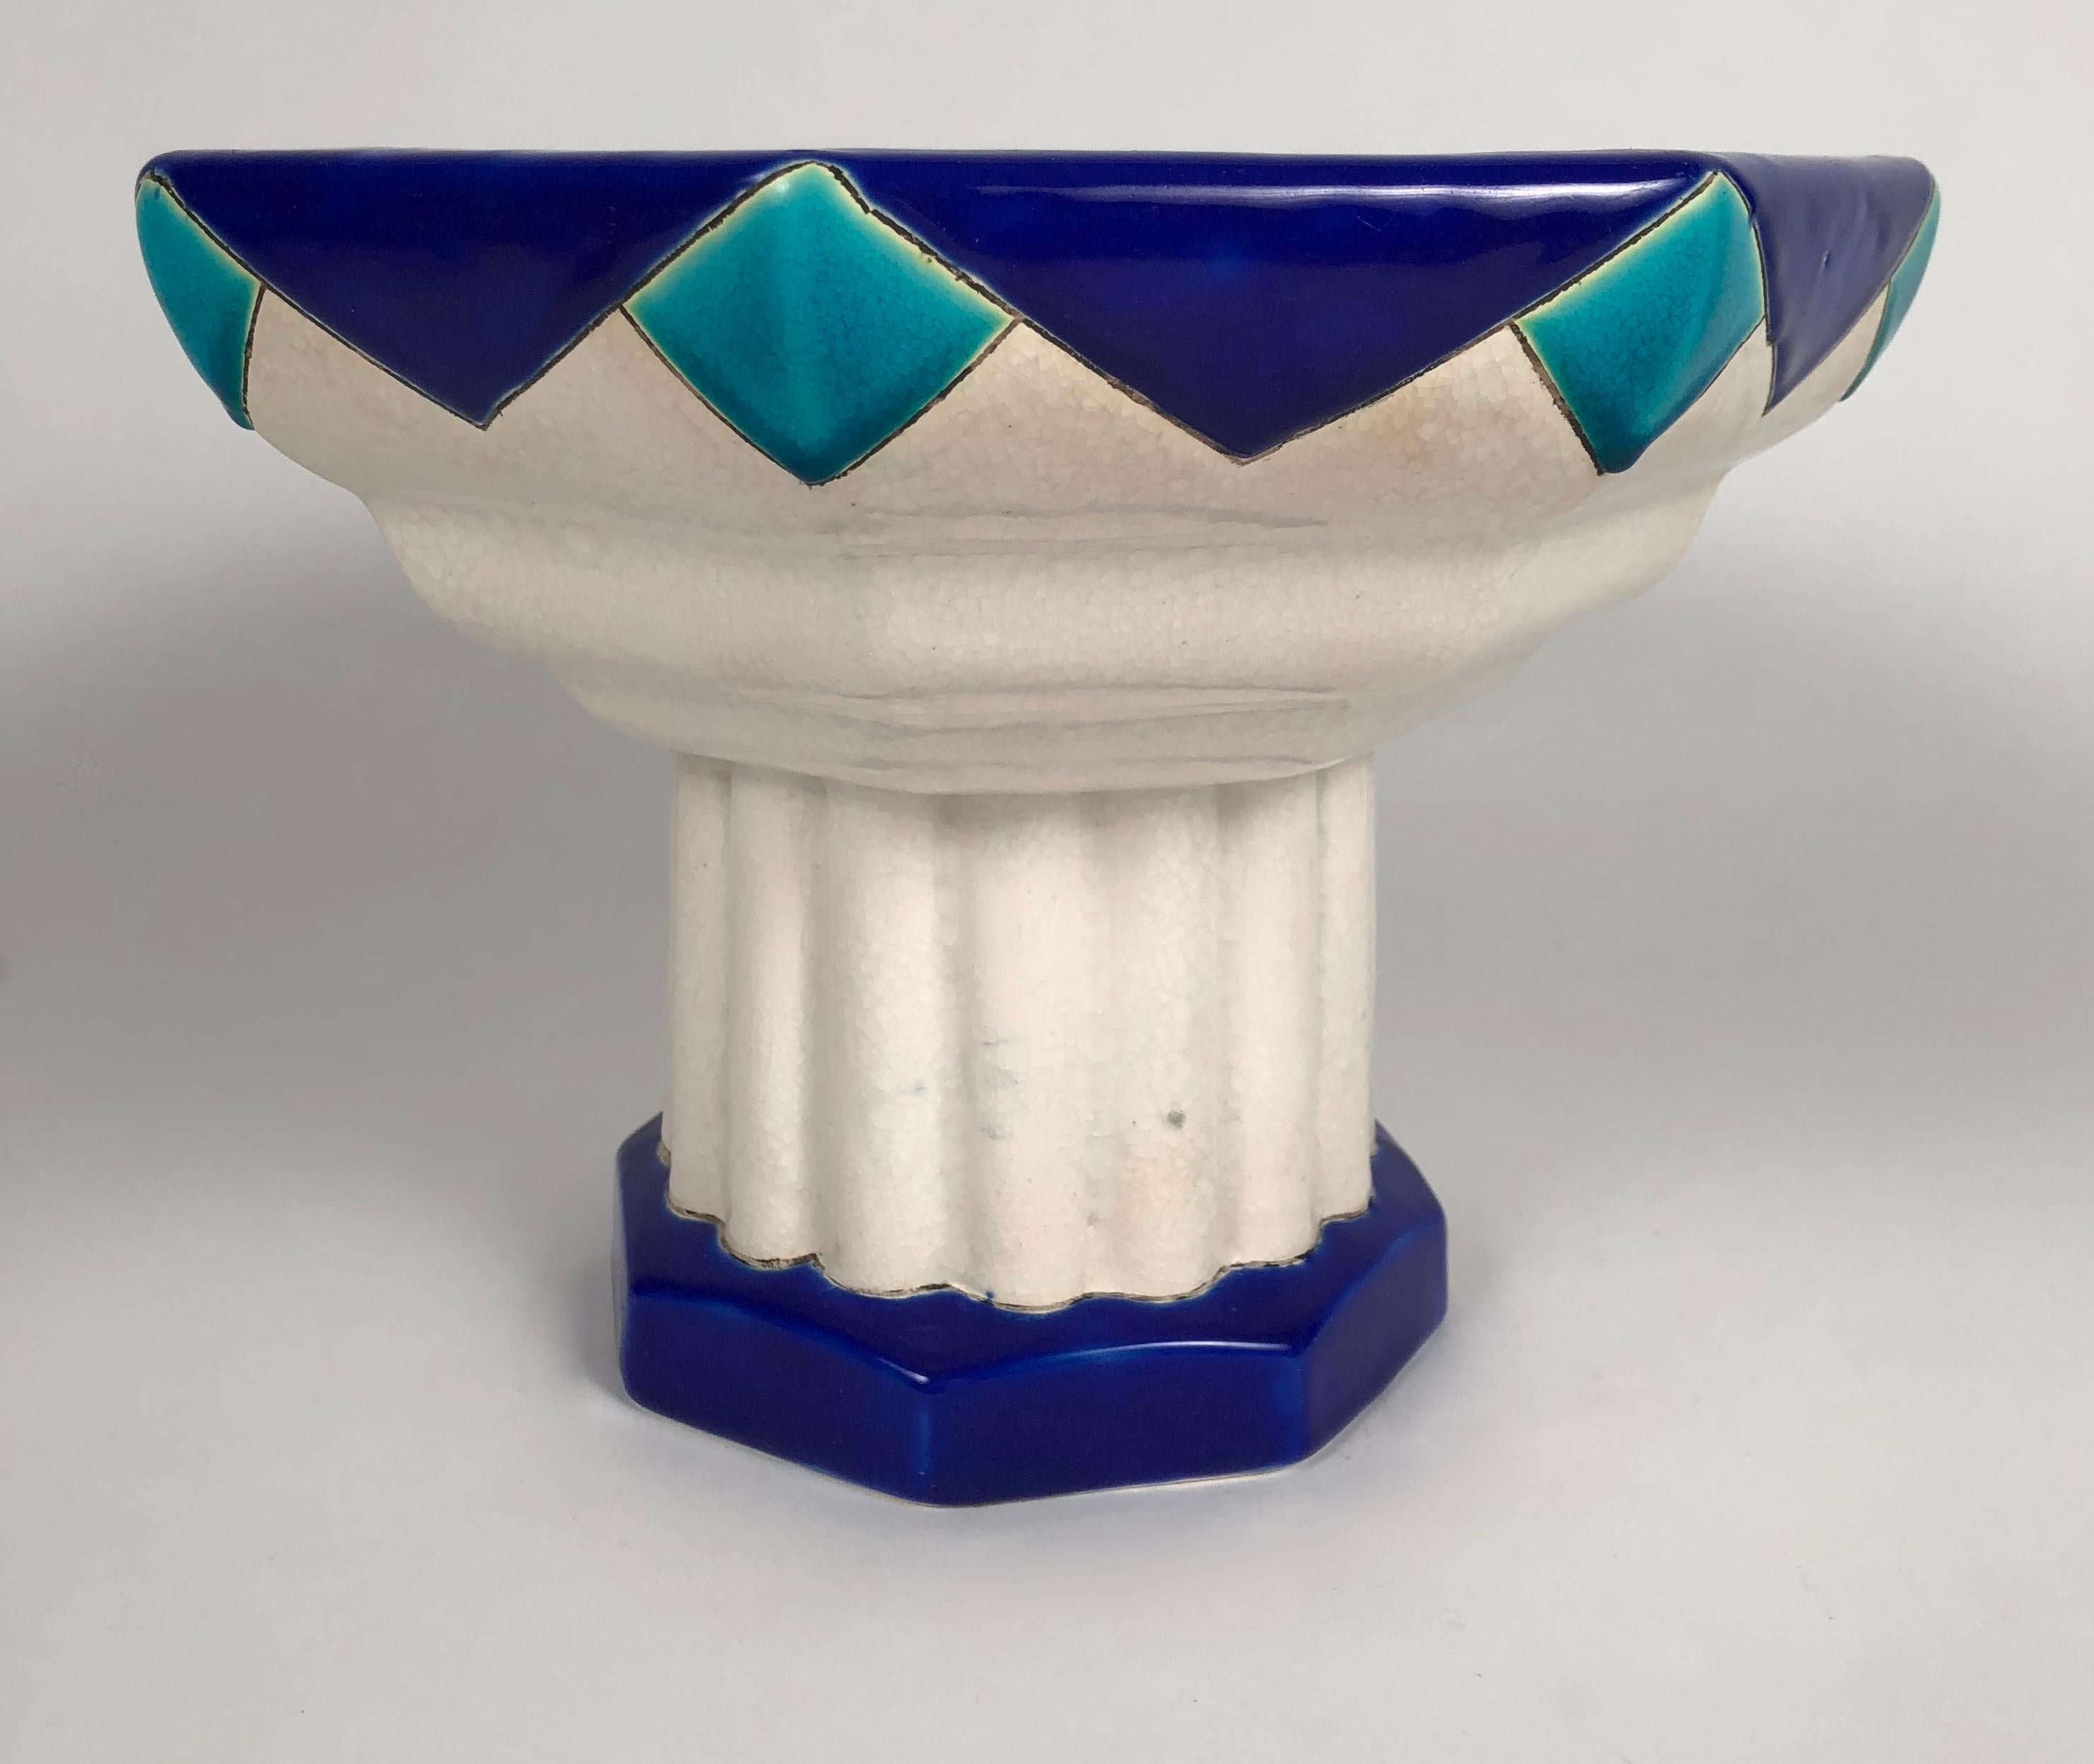 Art Deco Period Blue Turquoise and White Ceramic Footed Bowl by Boch Frères (Art déco)